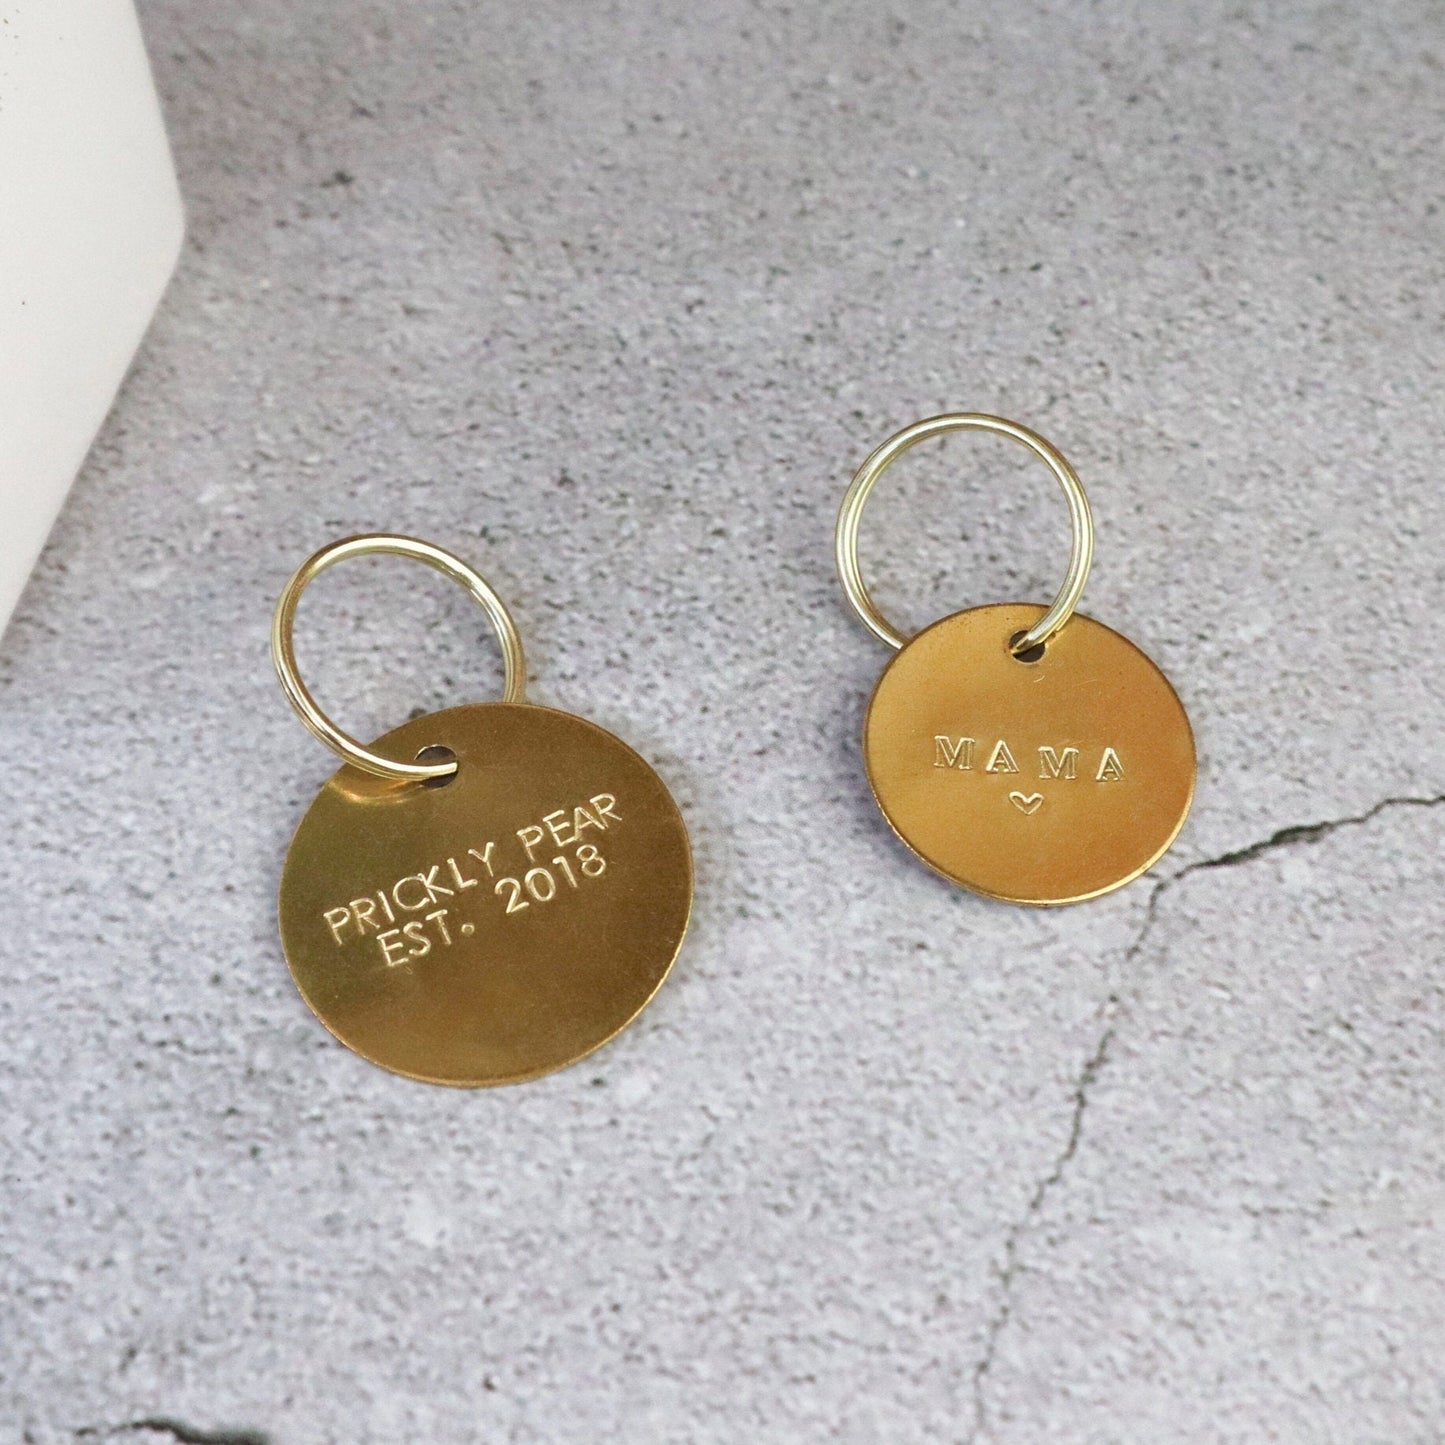 Brass Disc Key Chain Small / Large